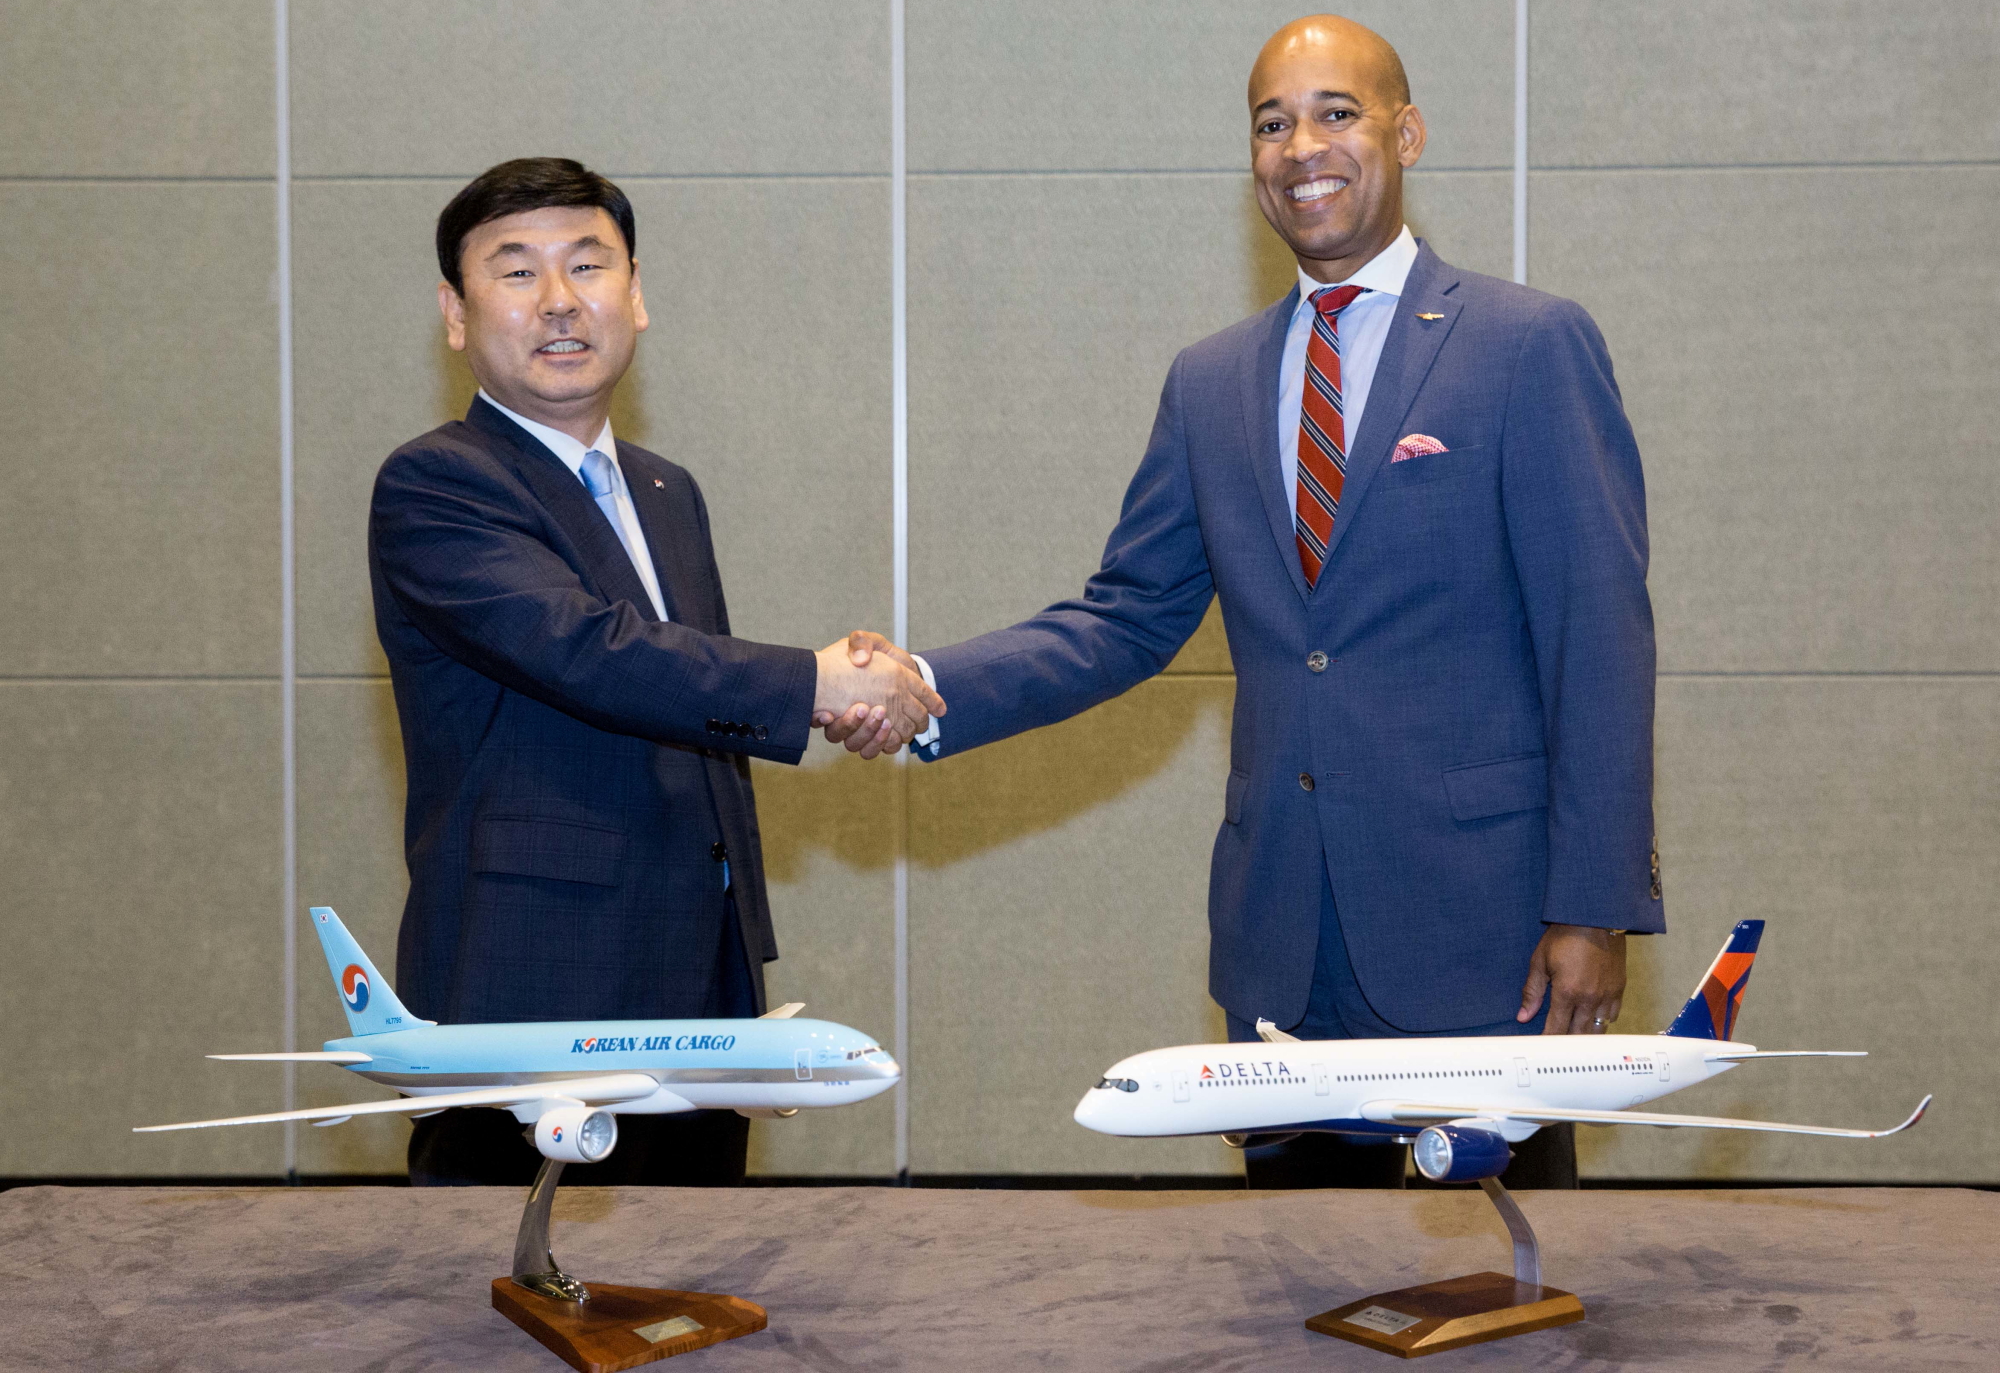 Samsug Noh, Senior Vice President, Head of Cargo Business Division, Korean Air, shaking hands with Shawn Cole, Delta’s Vice President – Cargo. Click to enlarge.